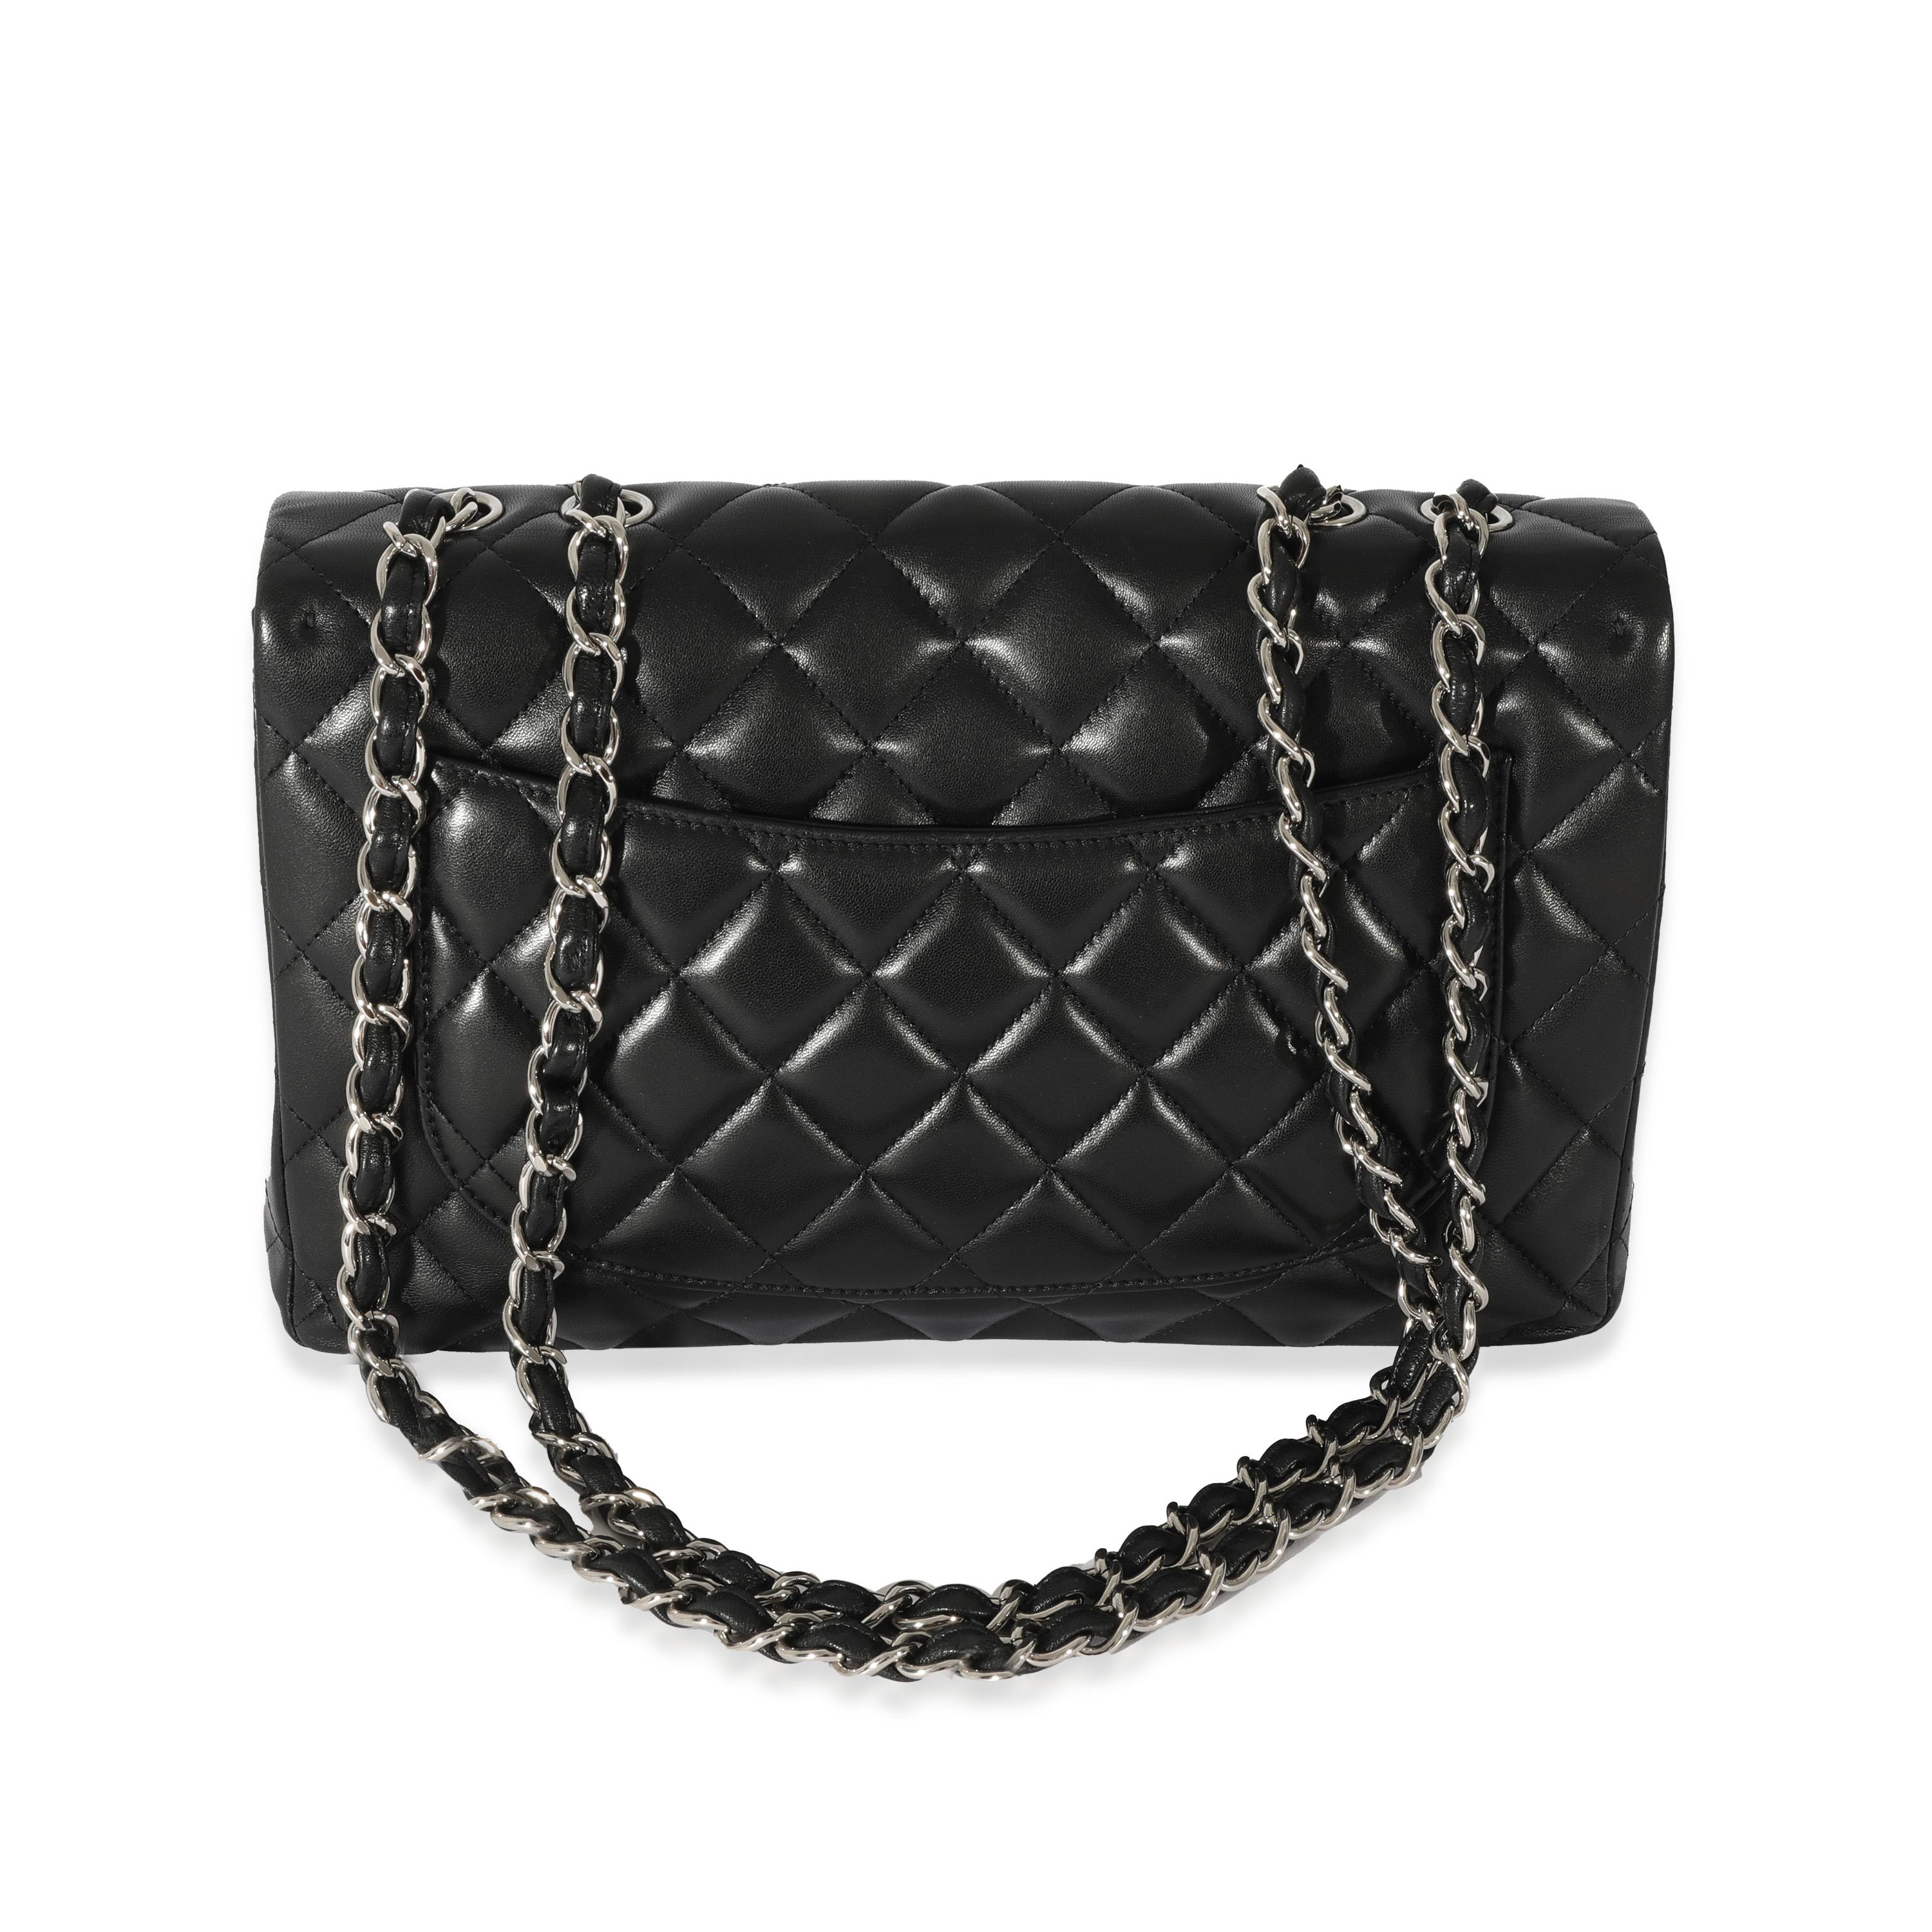 Chanel Black Lambskin Jumbo Single Flap Bag In Excellent Condition For Sale In New York, NY